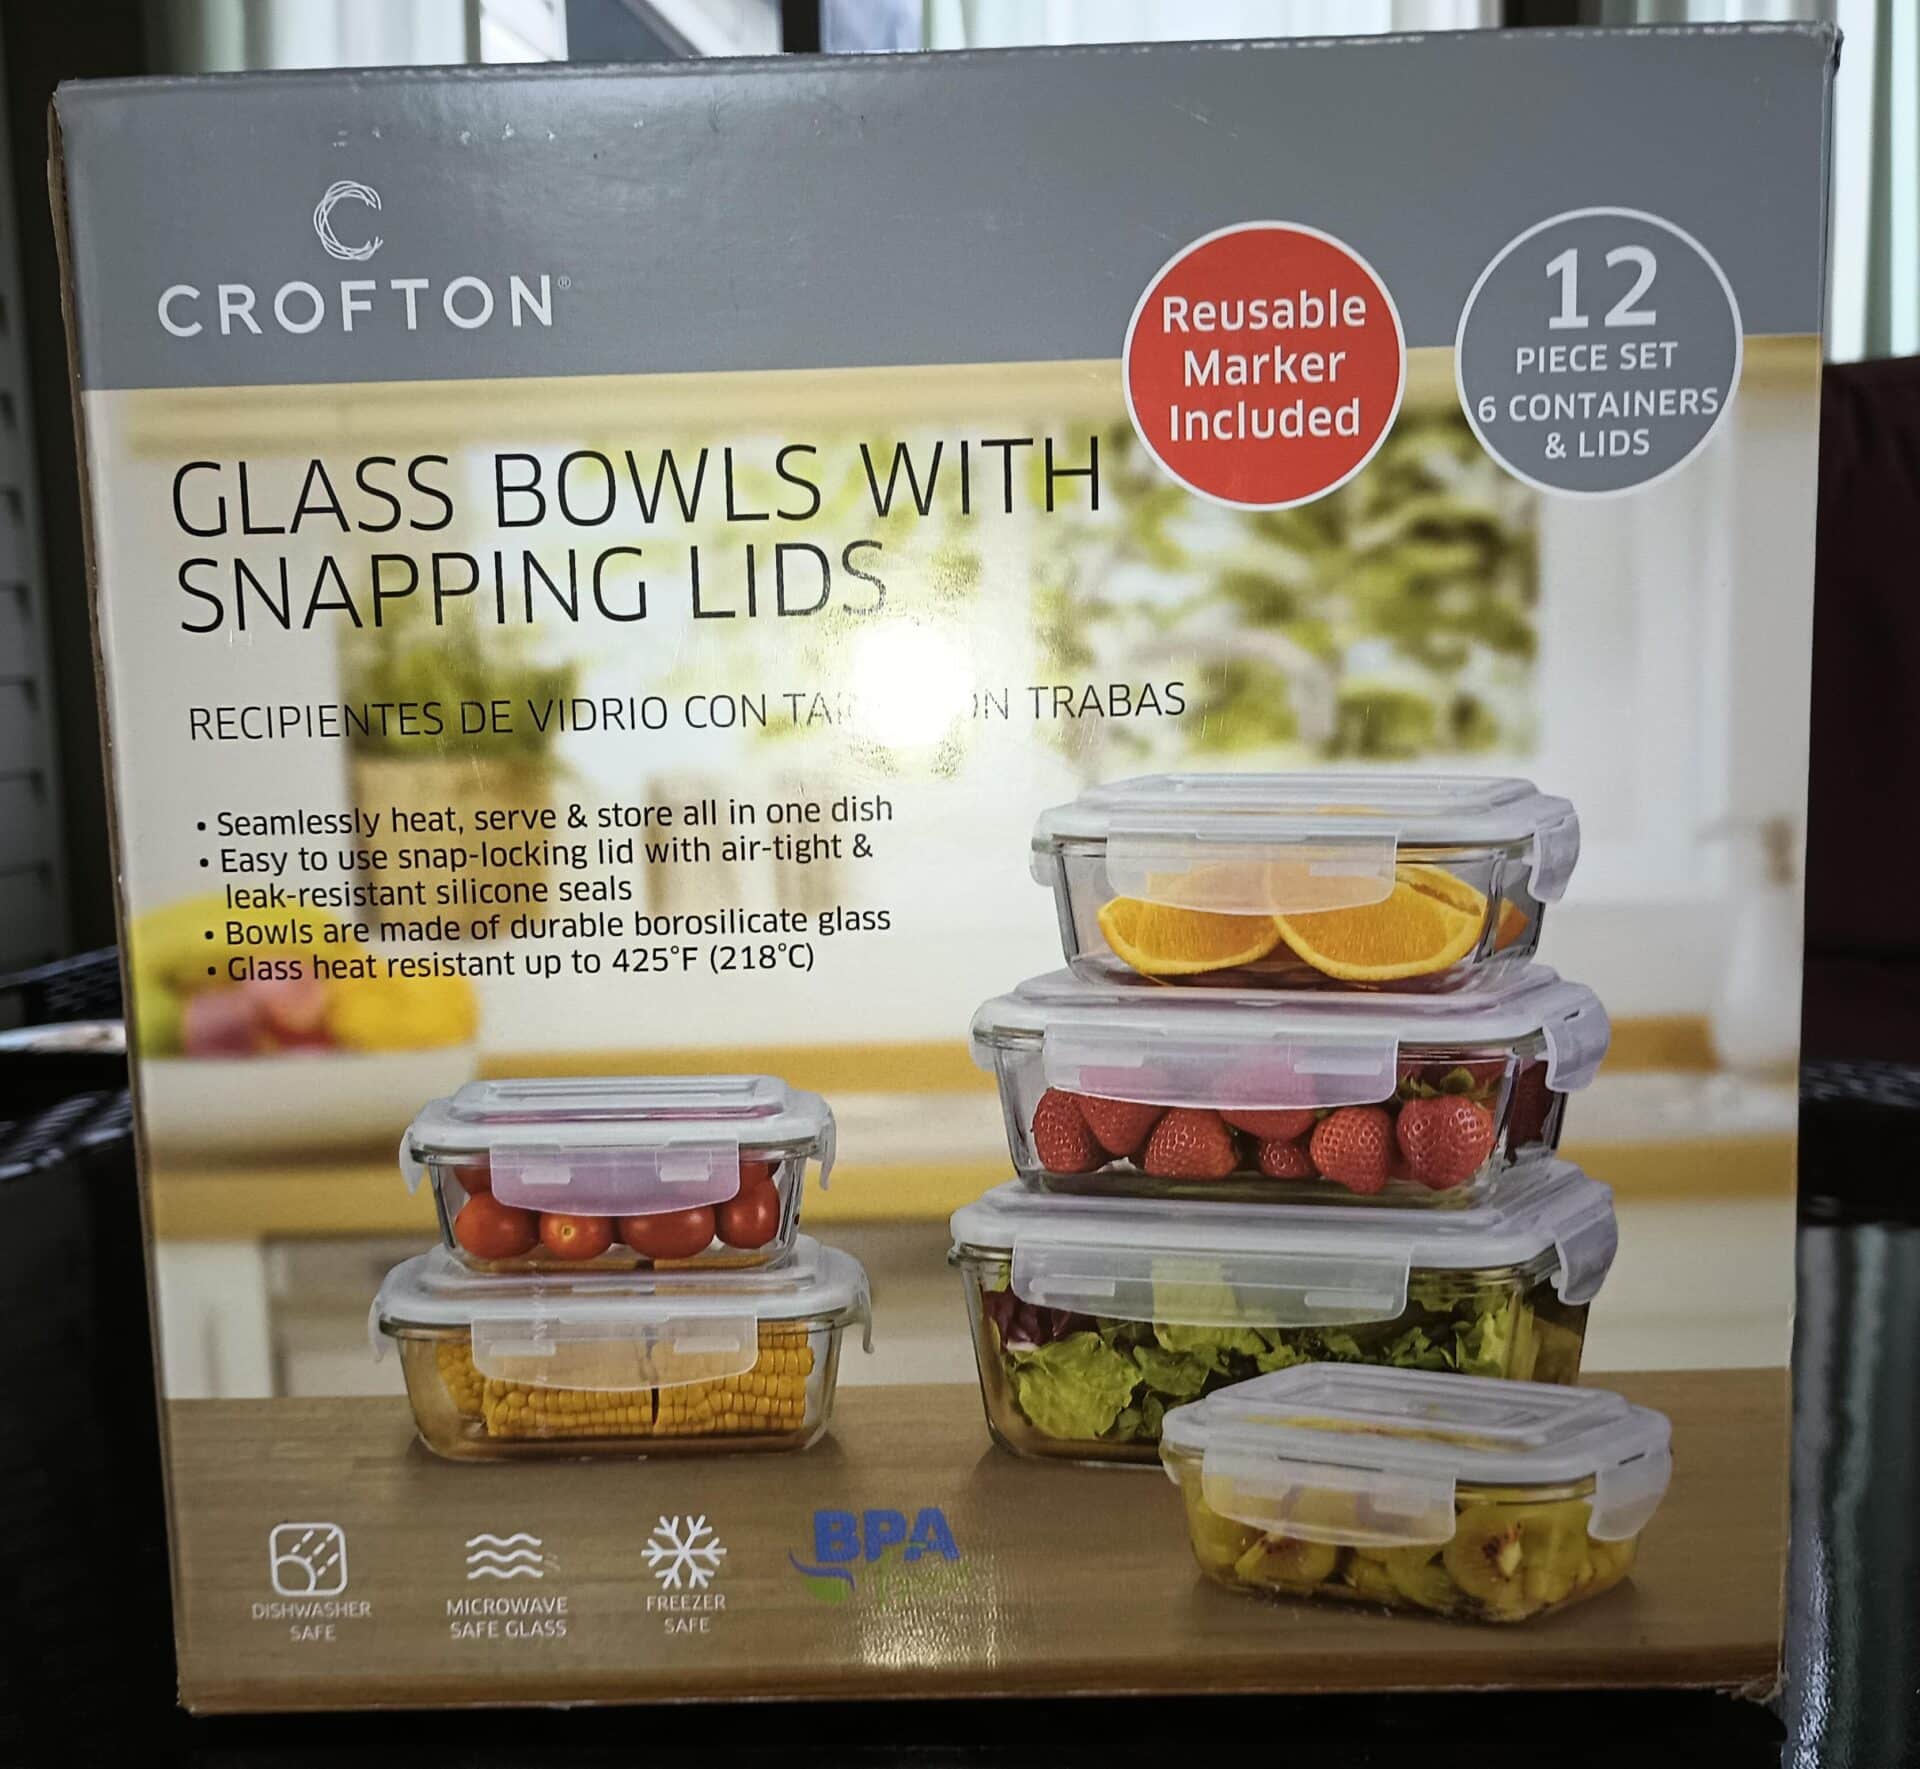 https://www.aldireviewer.com/wp-content/uploads/2023/05/Crofton-Glass-Bowls-with-Snapping-Lids.jpg